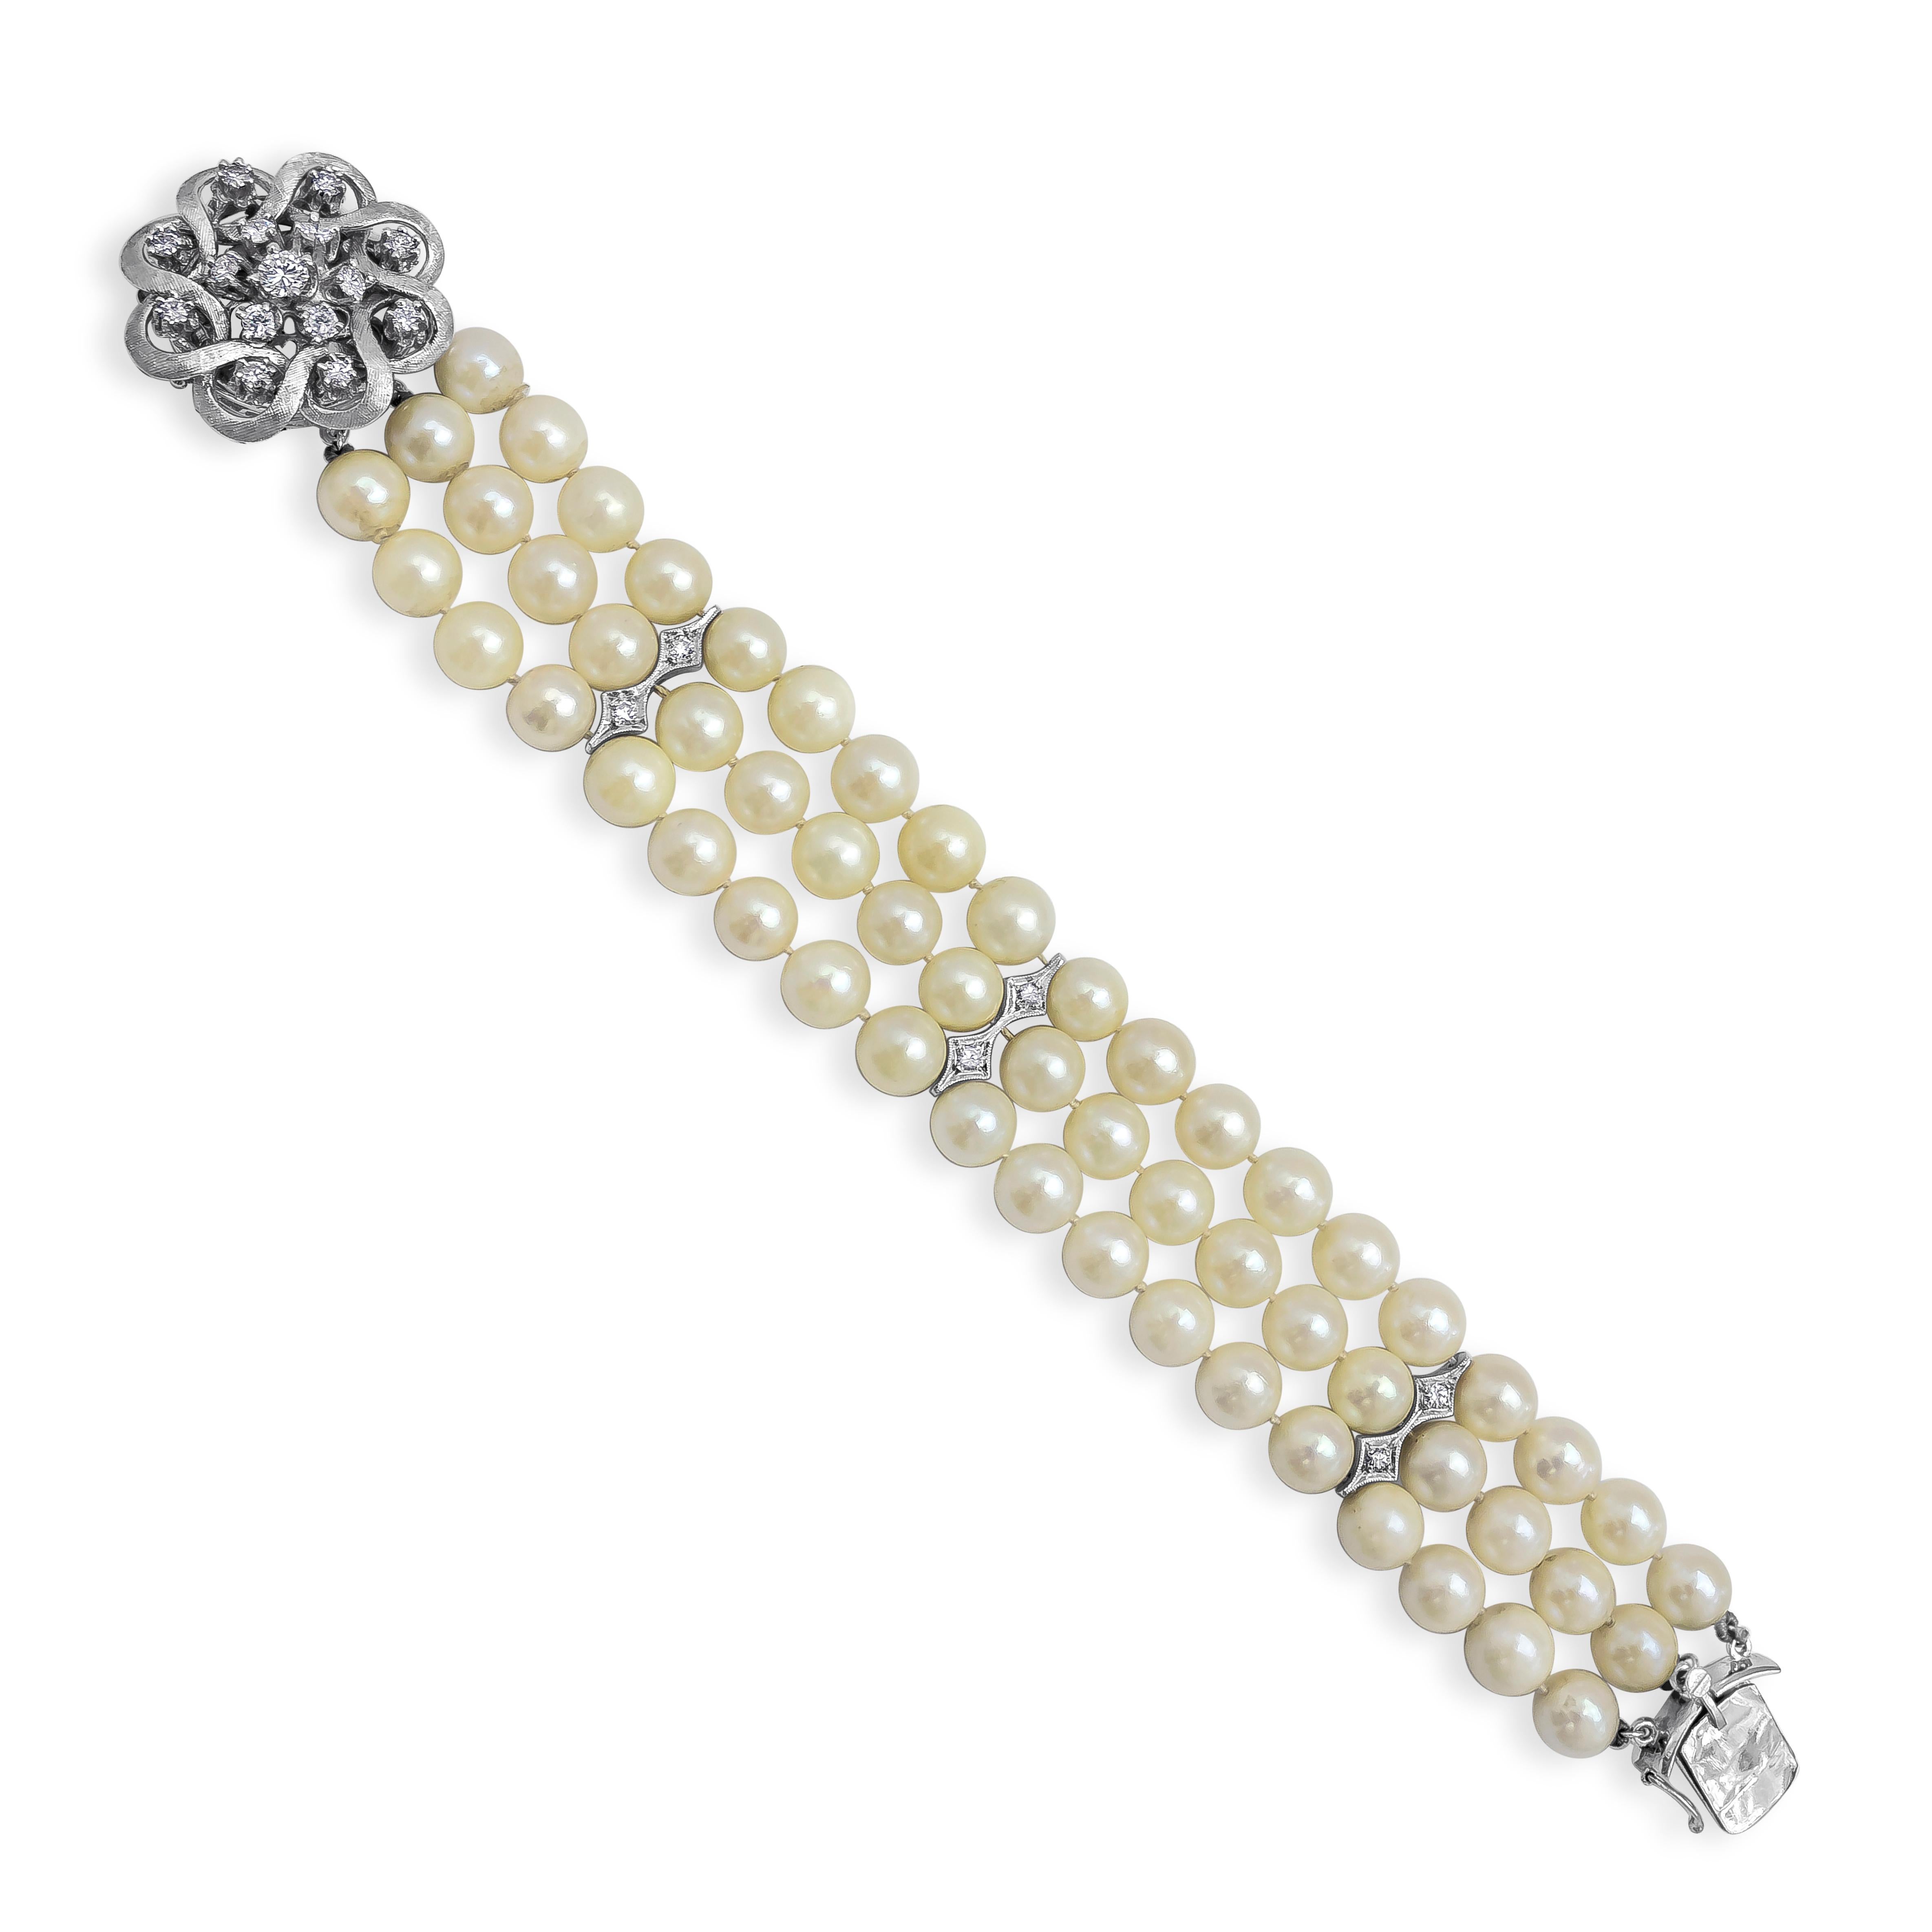 A simple but attractive and rare piece of pearl and diamond bracelet showcasing 1.16 carat total, 21 pieces of brilliant round shape diamonds, set in a beautiful floral-motif design, and attached by 7.50 mm three strands of pearl. The white gold